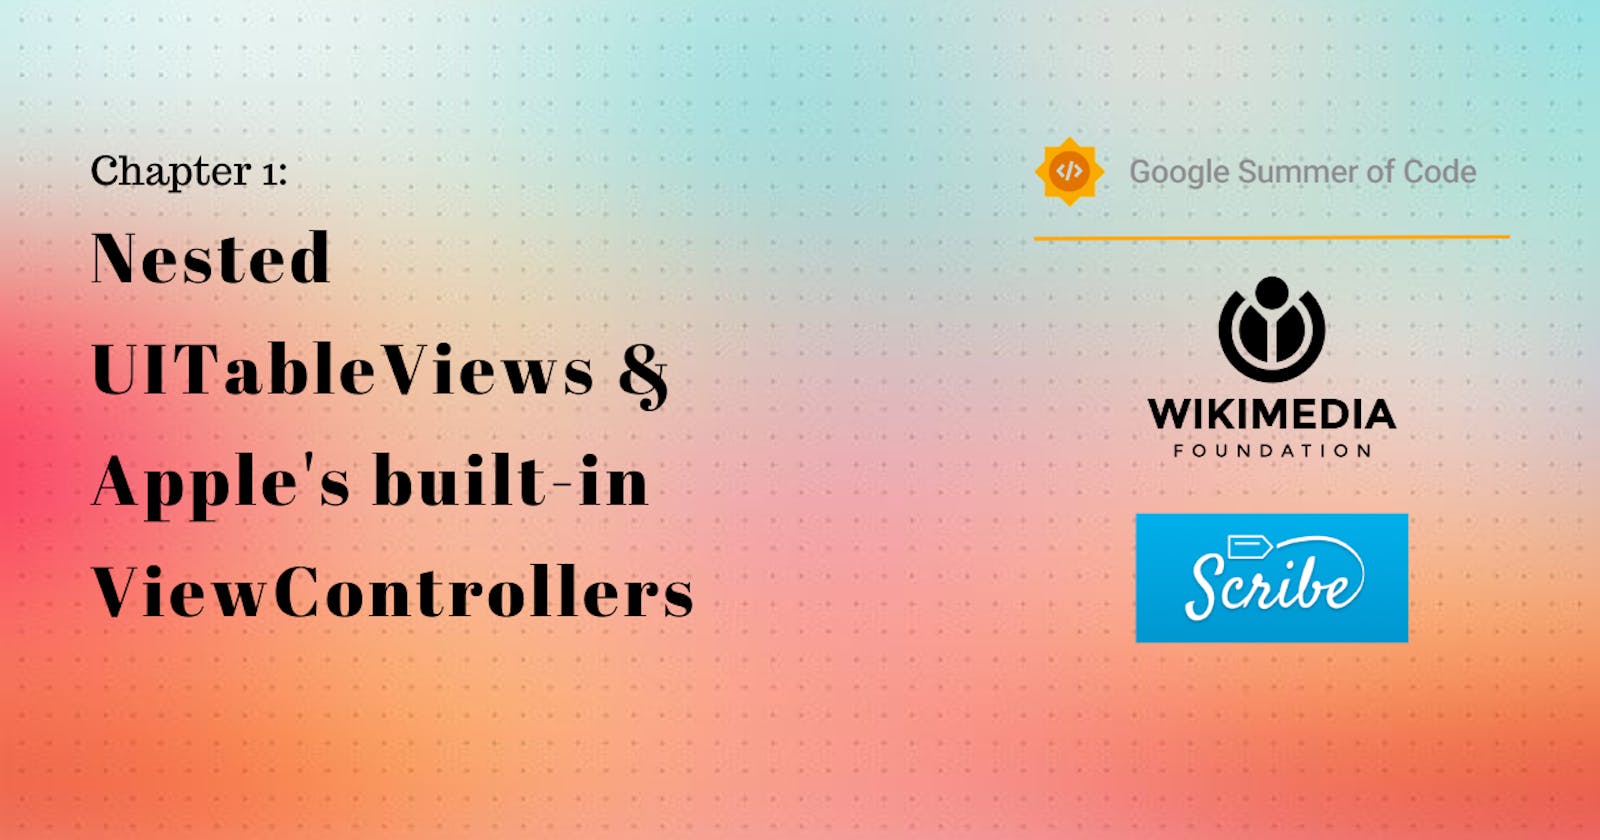 Nested UITableViews & Apple's built-in ViewControllers